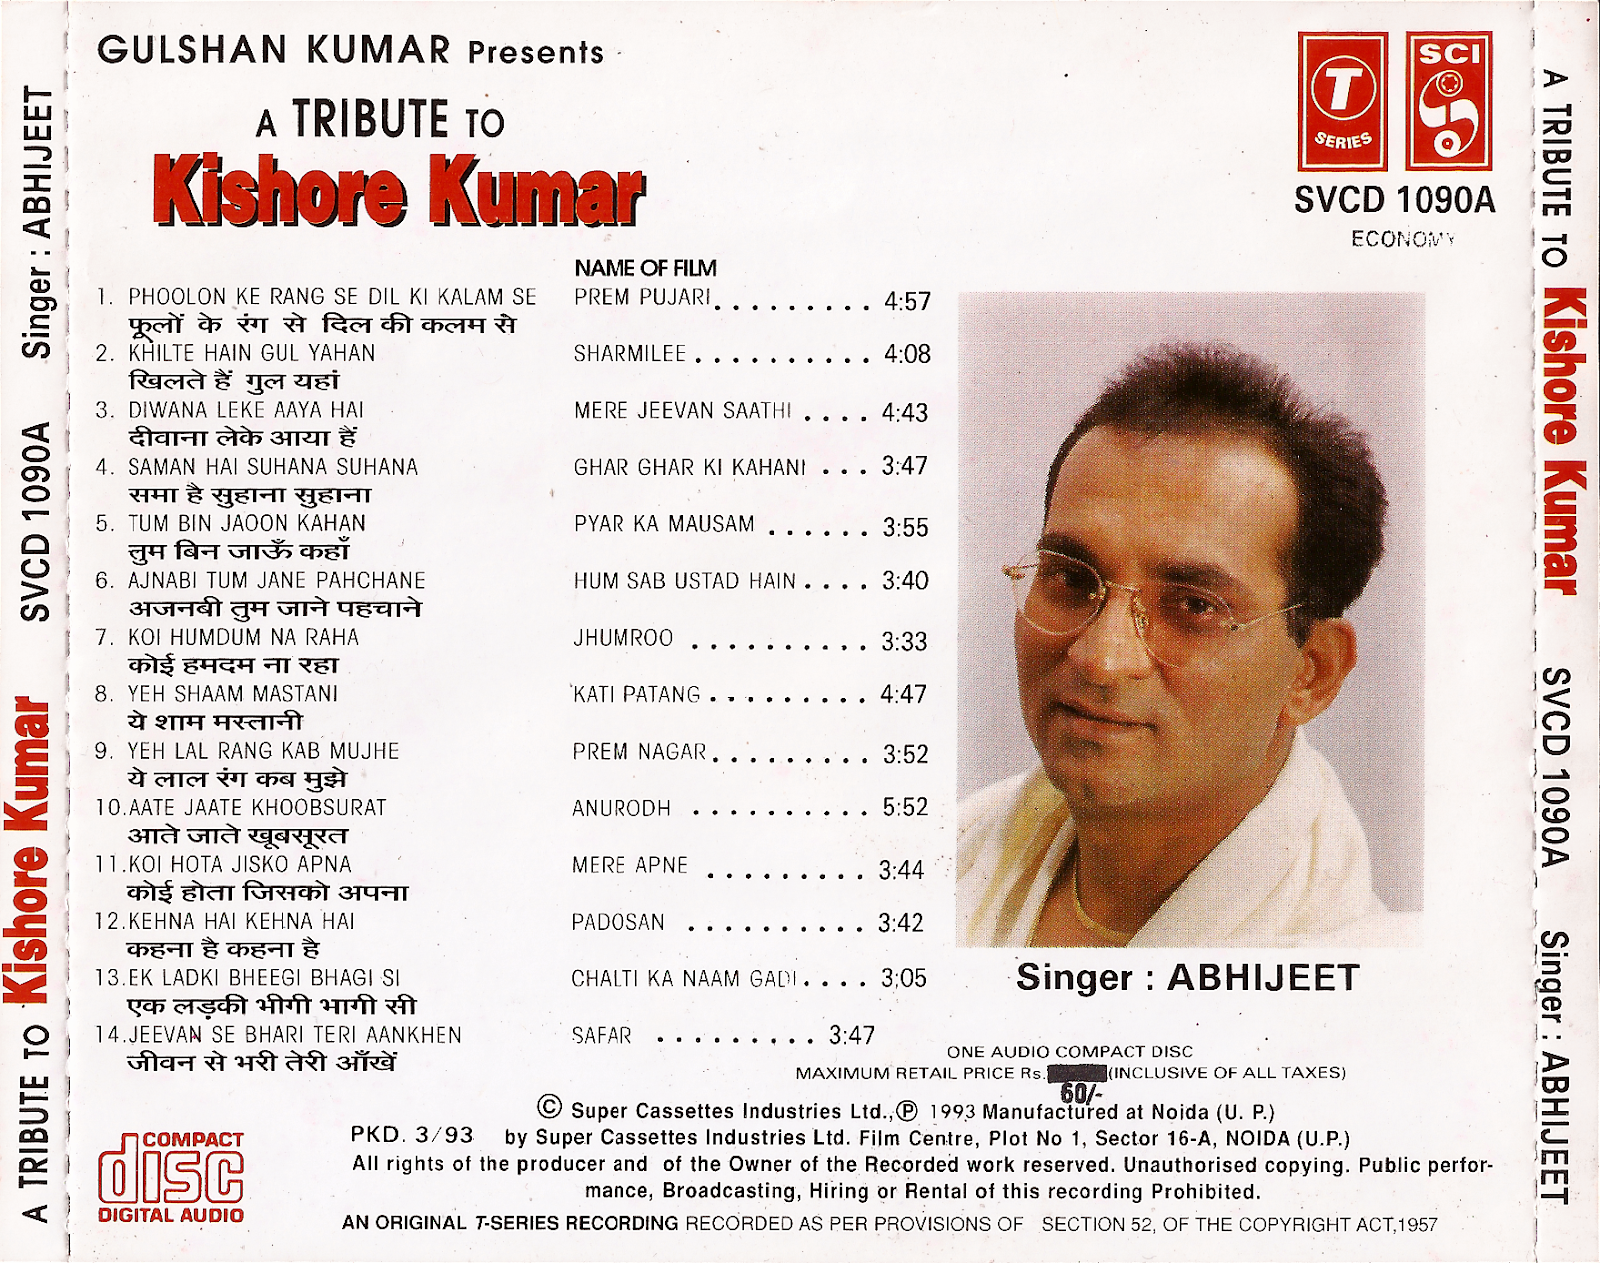 Tribute to kishore kumar by abhijeet vol 1 mp3 download